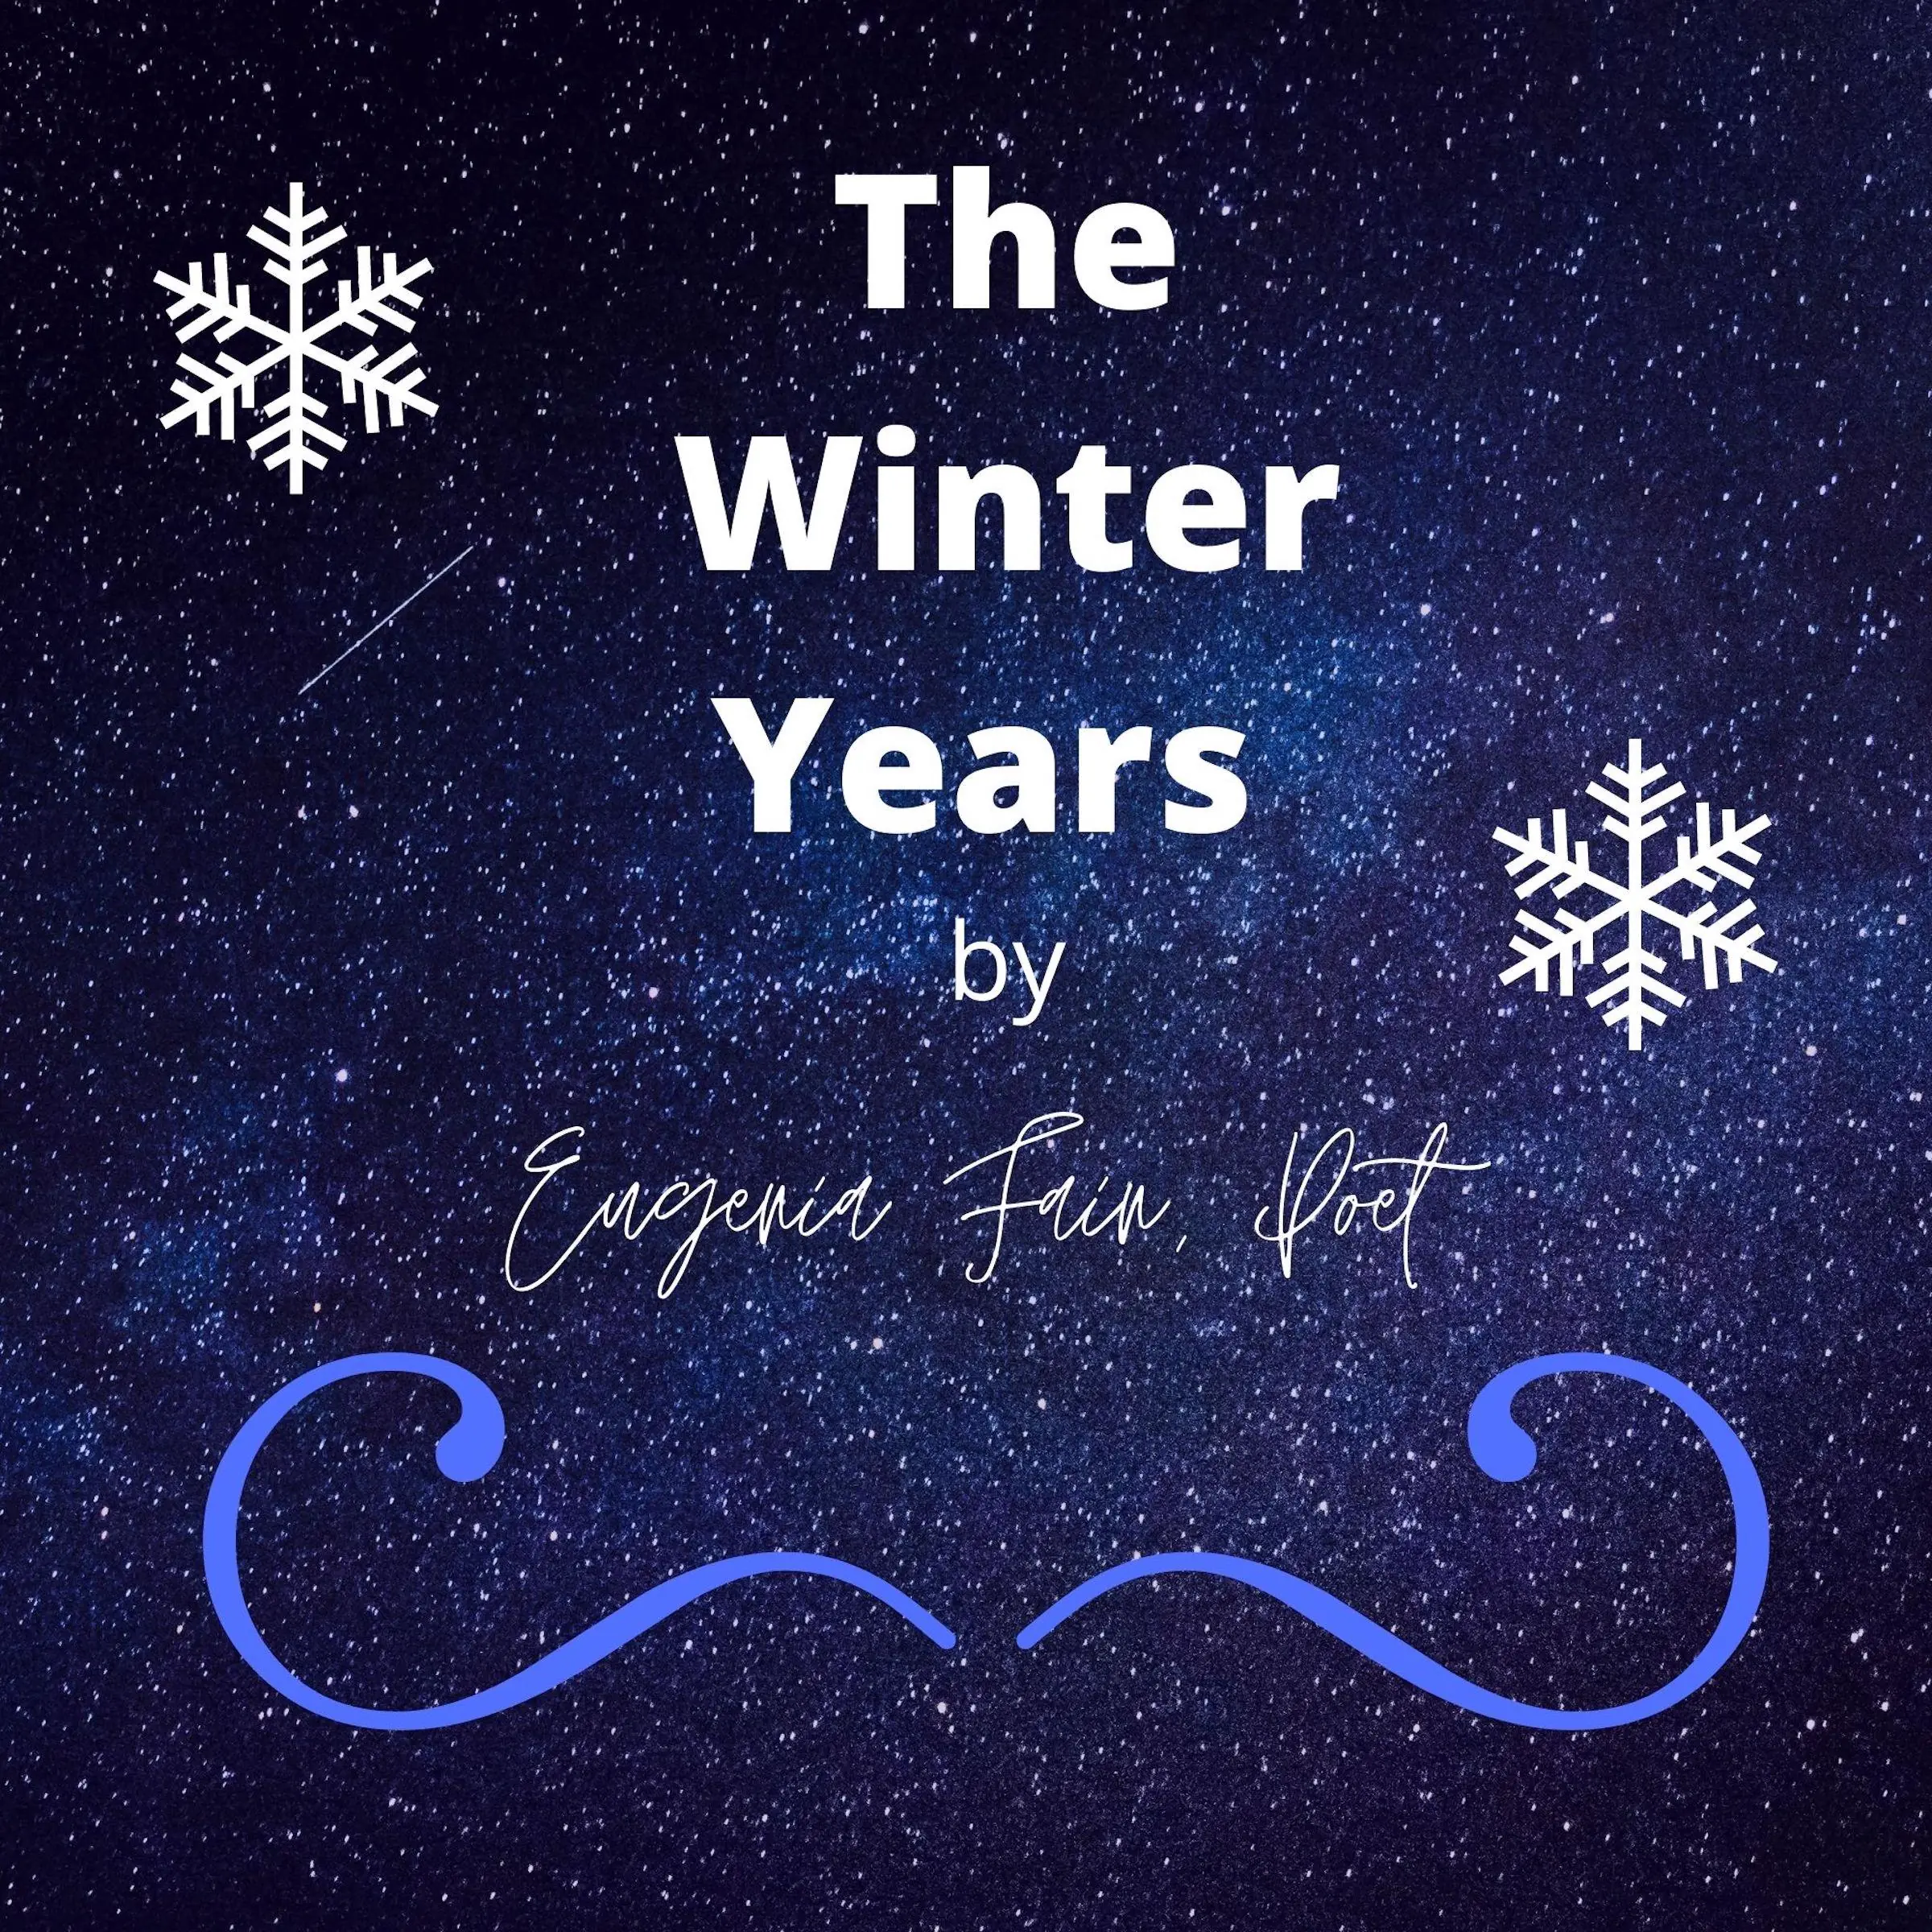 The Winter Years Audiobook by Eugenia Fain